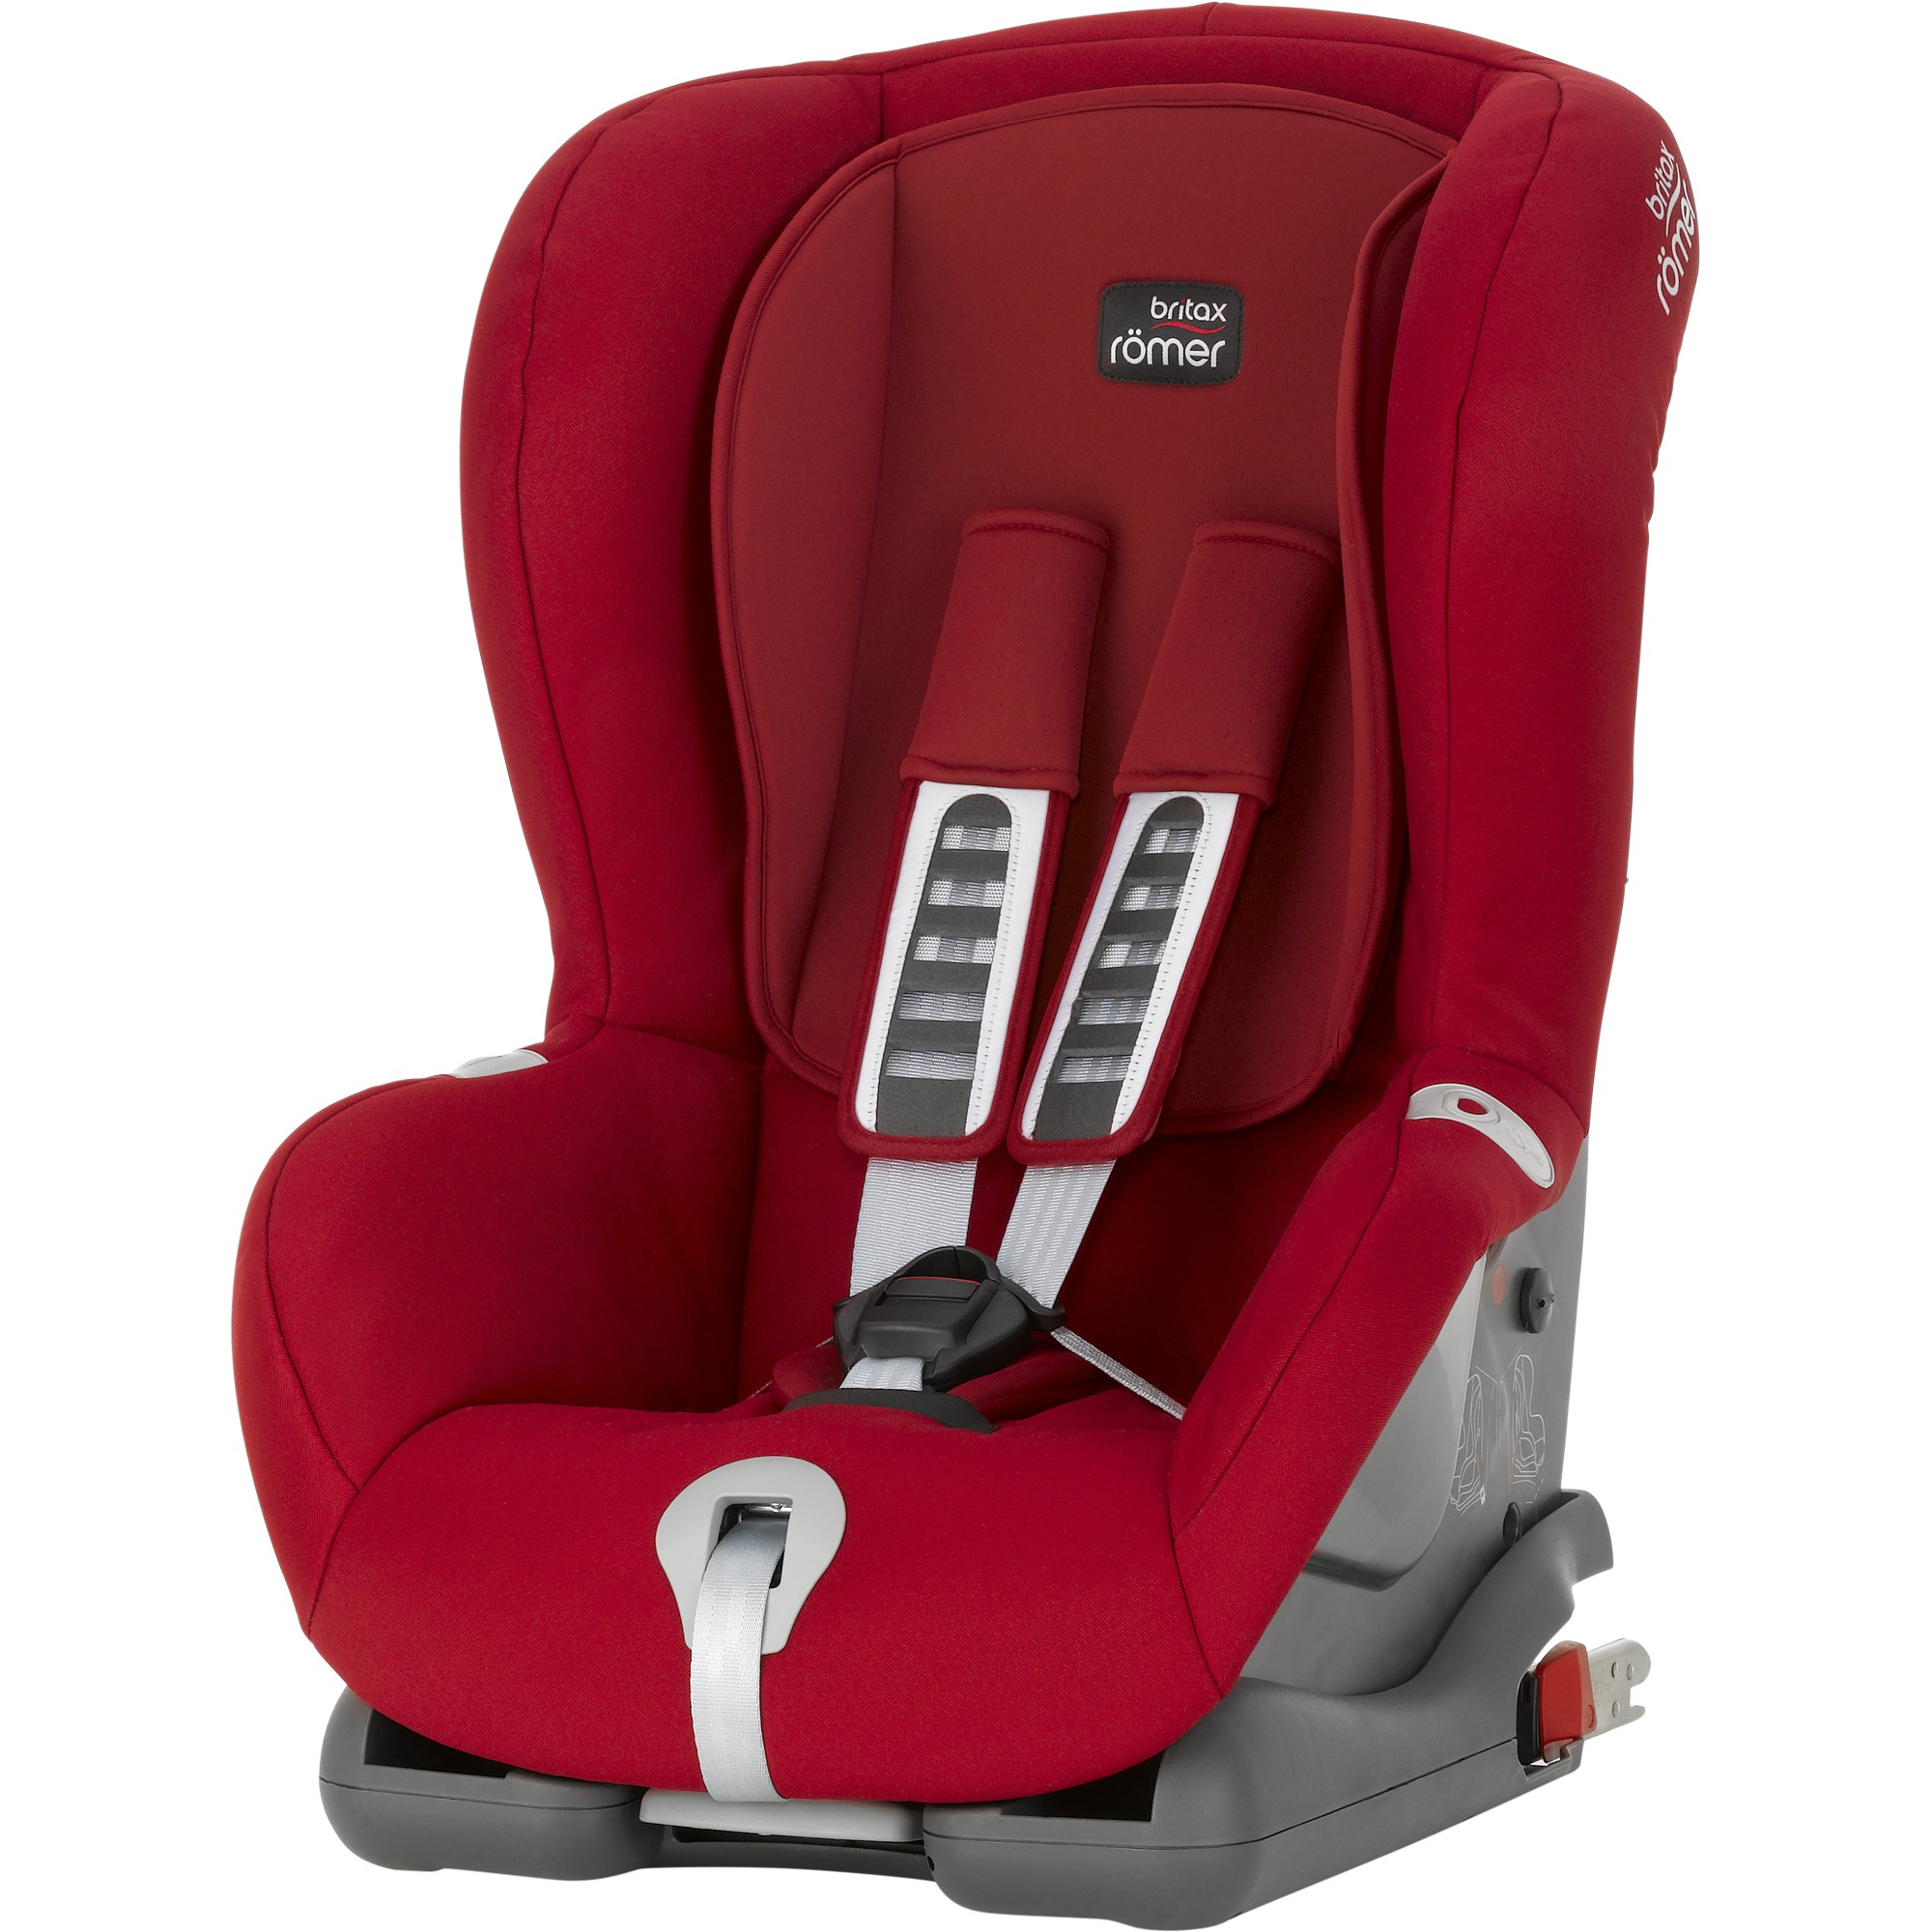 Römer Duo plus 2016 Flame Red